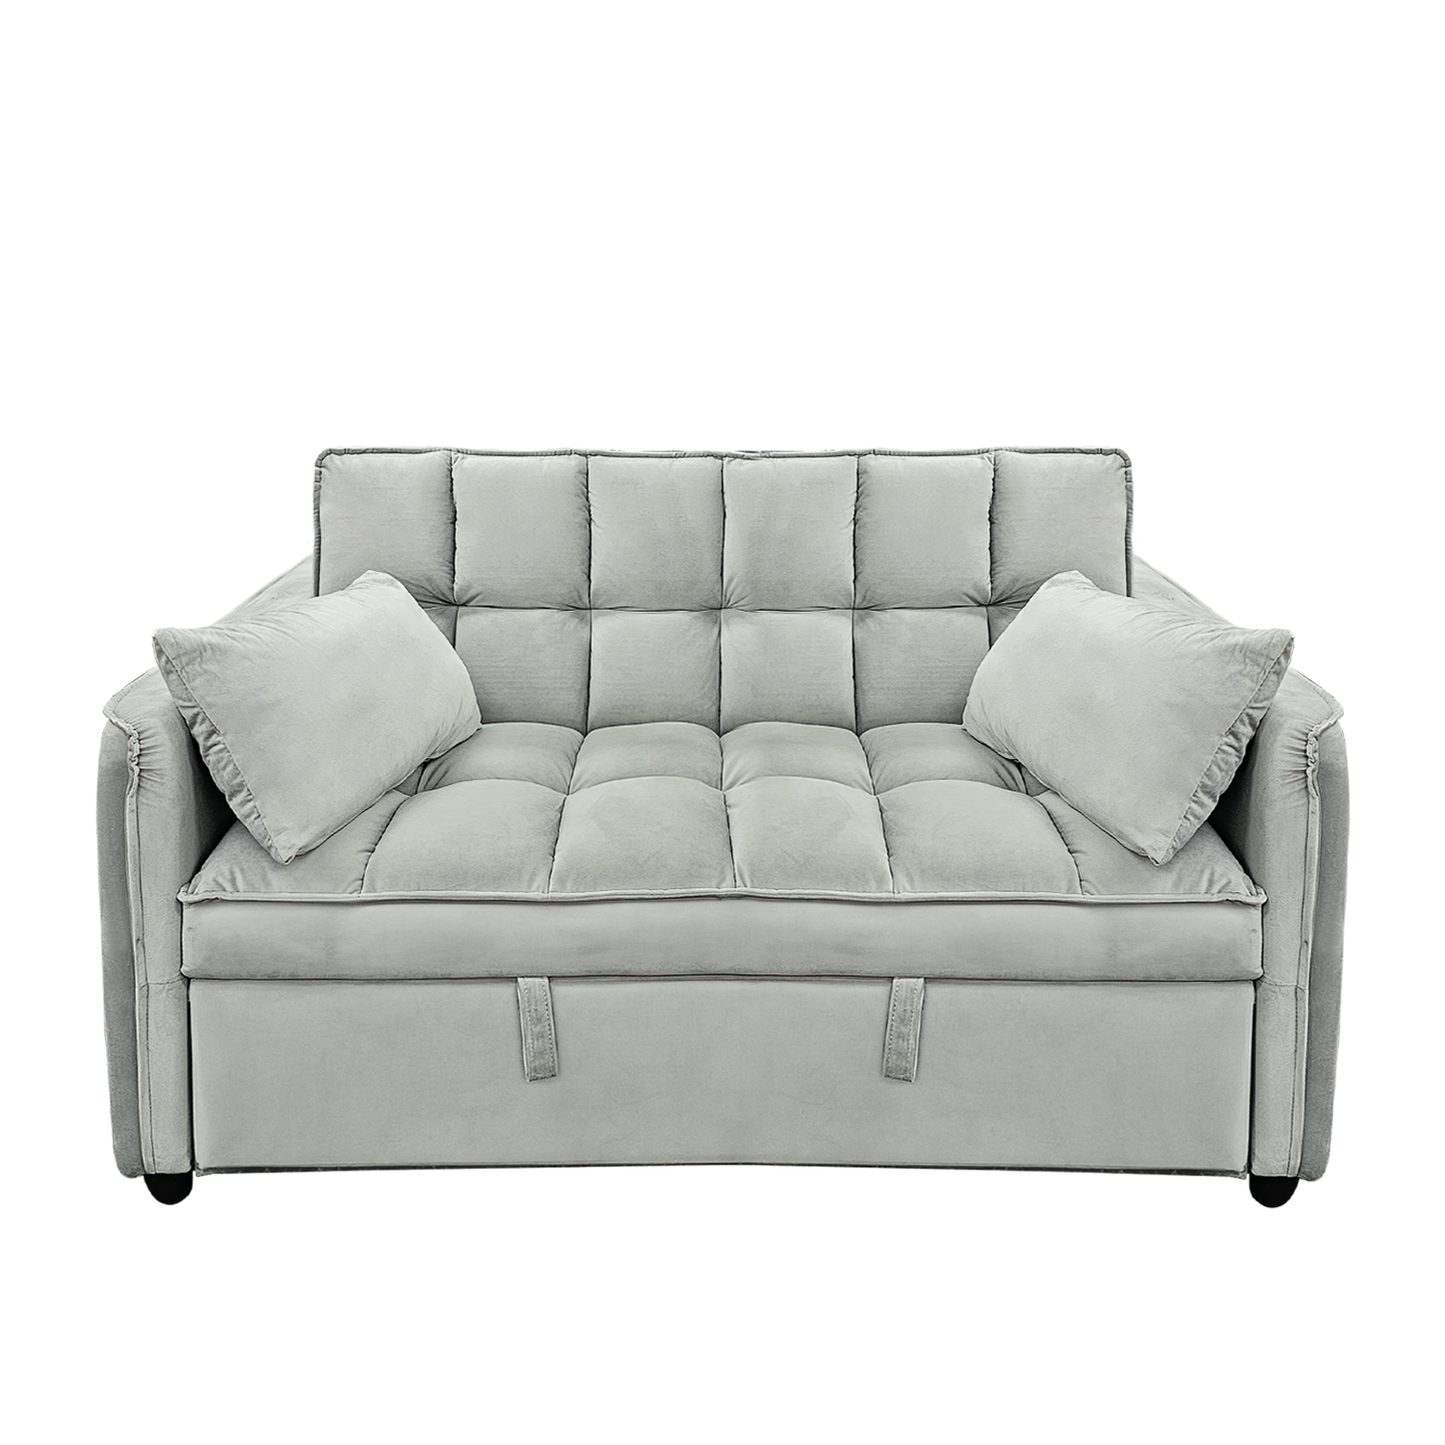 Sarantino Quincy 2-Seater Velvet Sofa Bed in Dark Grey with Wooden Frame and Tufted Design - Light Grey